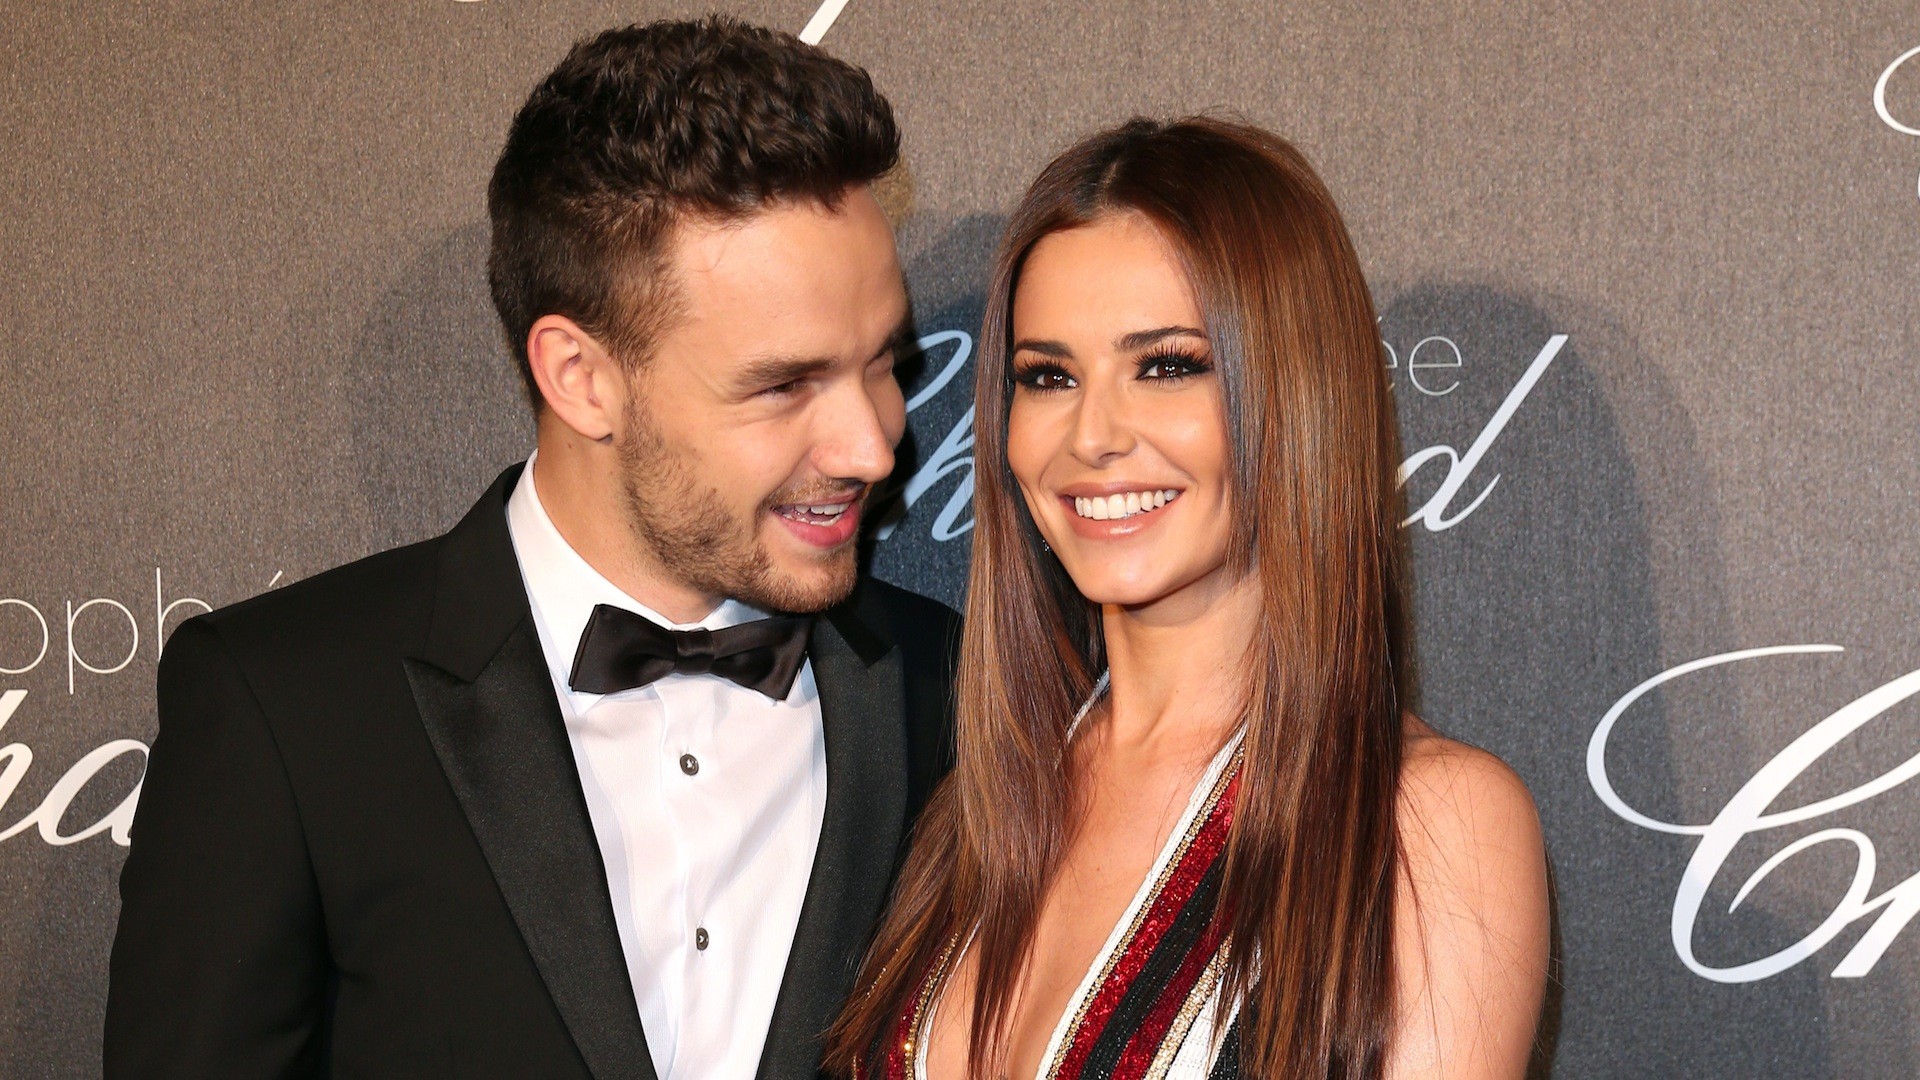 1920x1080 Cheryl and Liam Payne might never tell us what they call their baby, but we